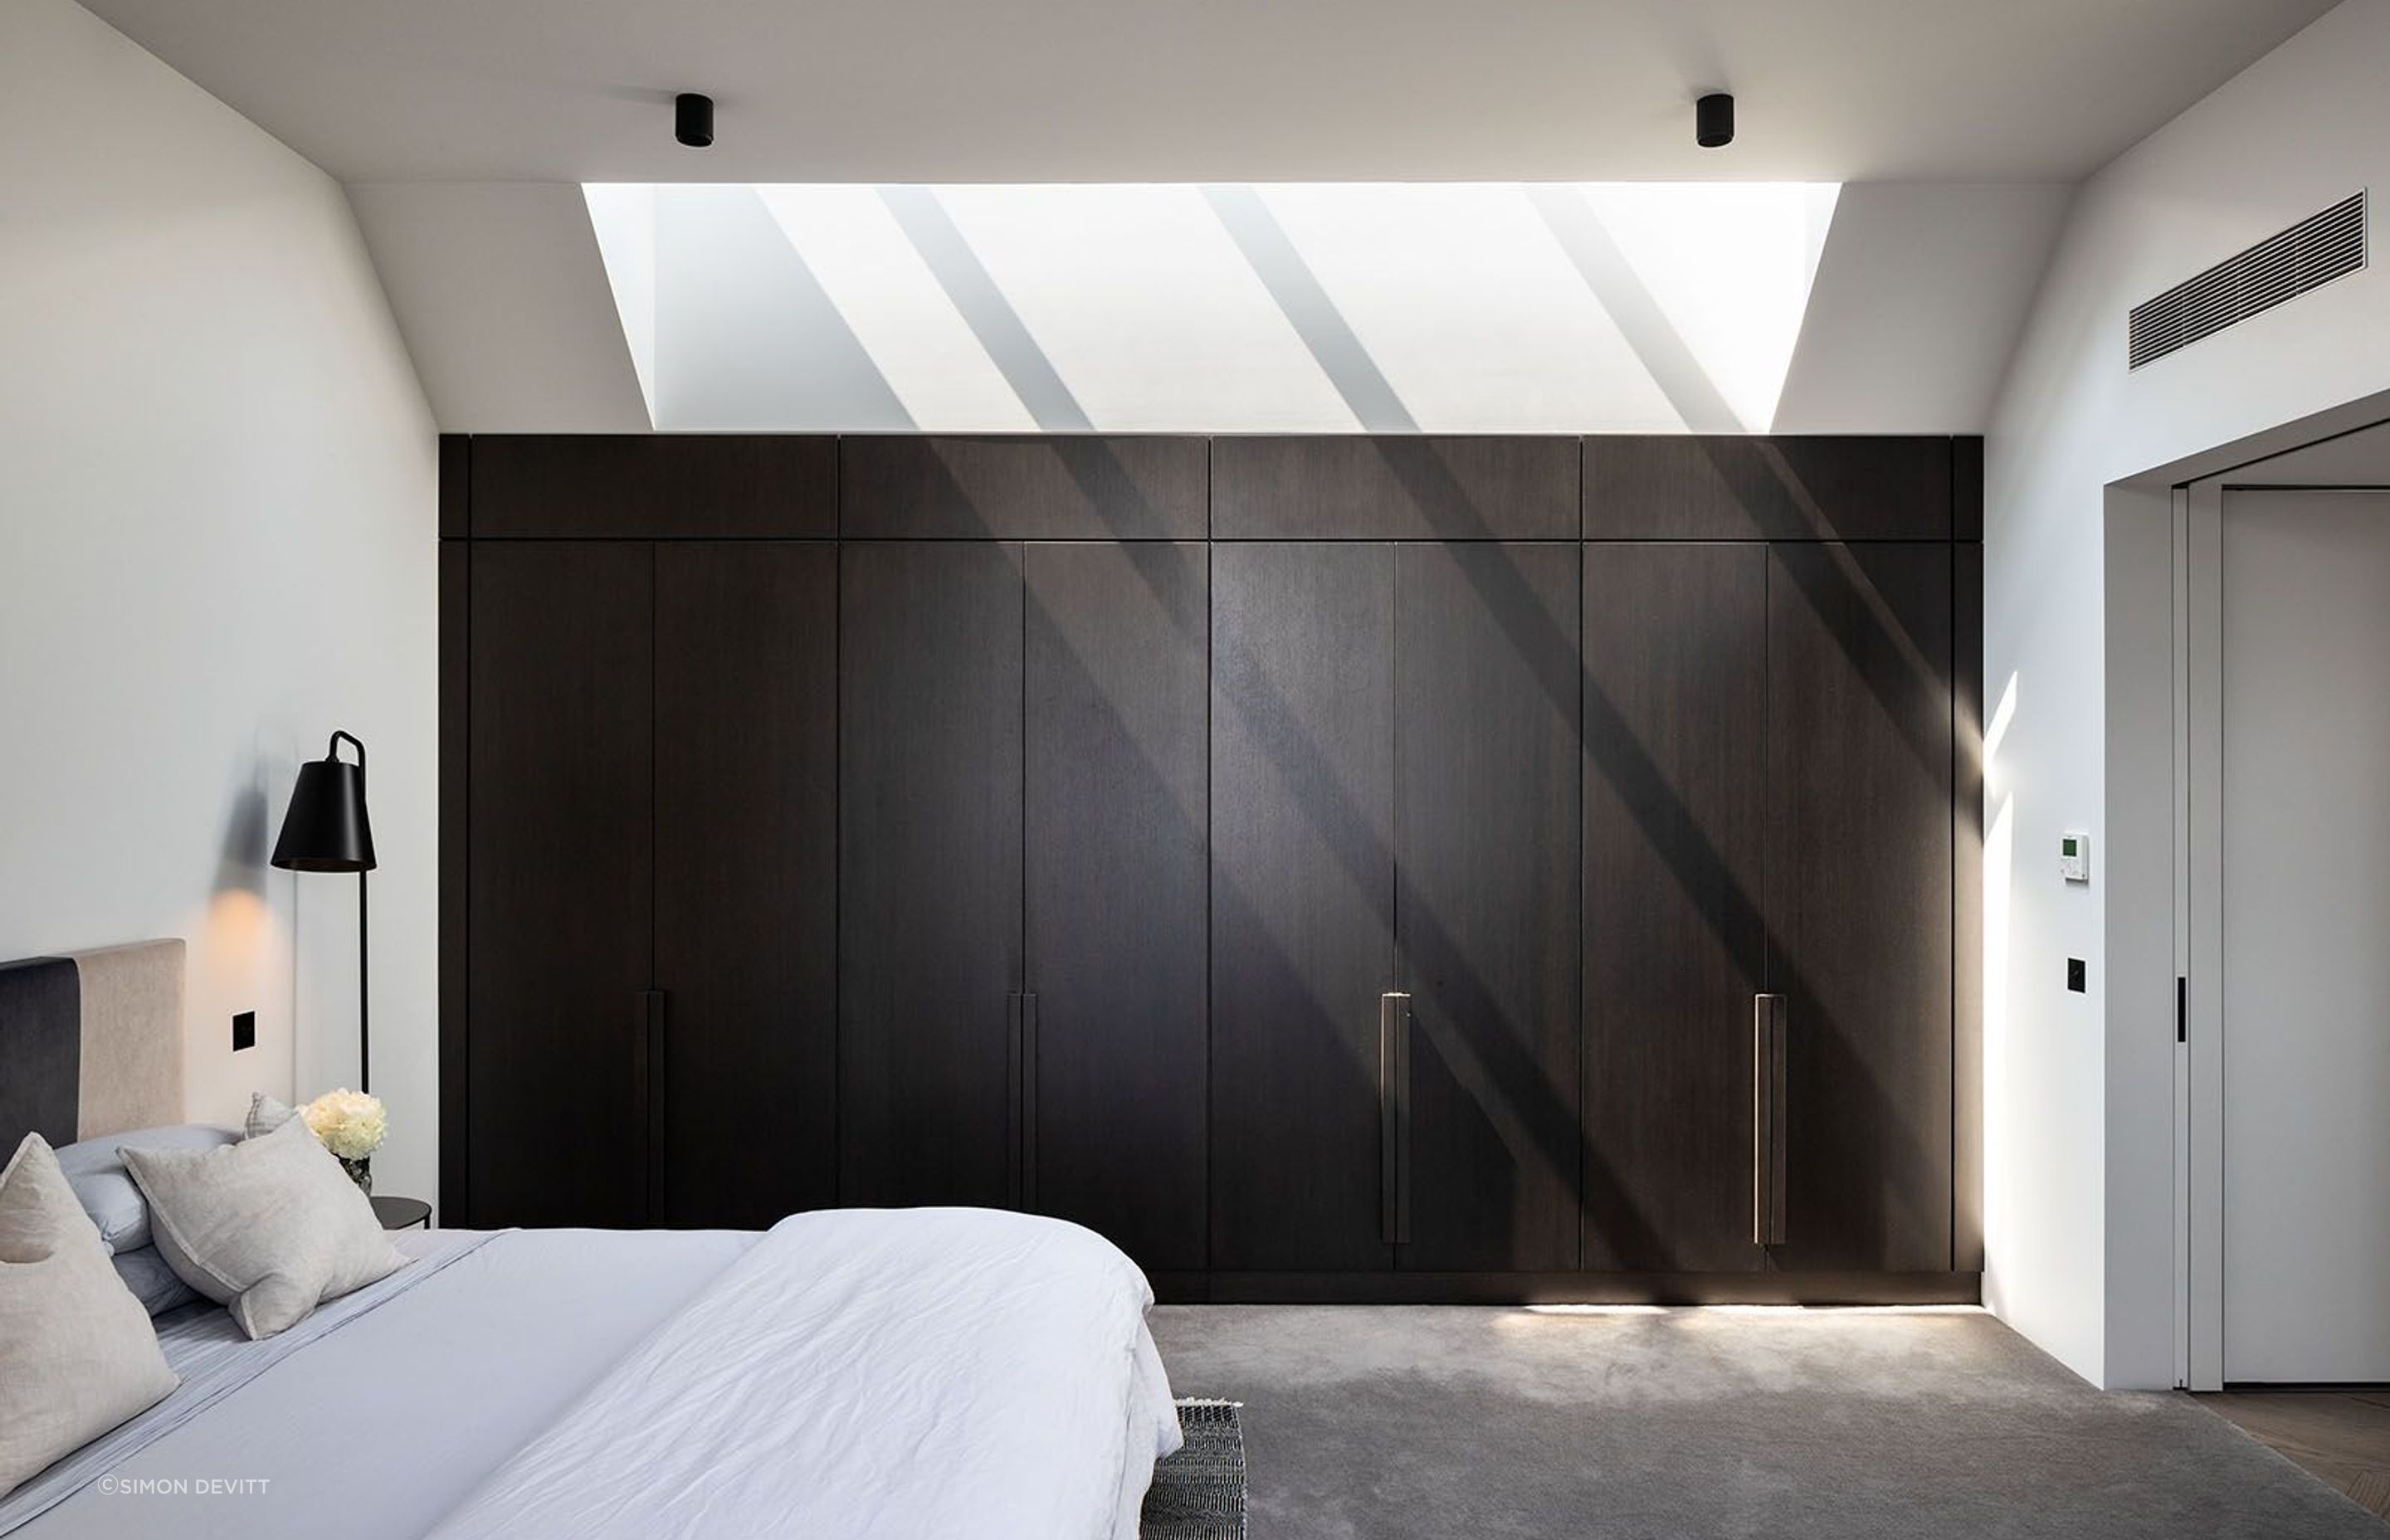 The master bedroom offers a continuation of the dark palette but creates a softness of light and texture.